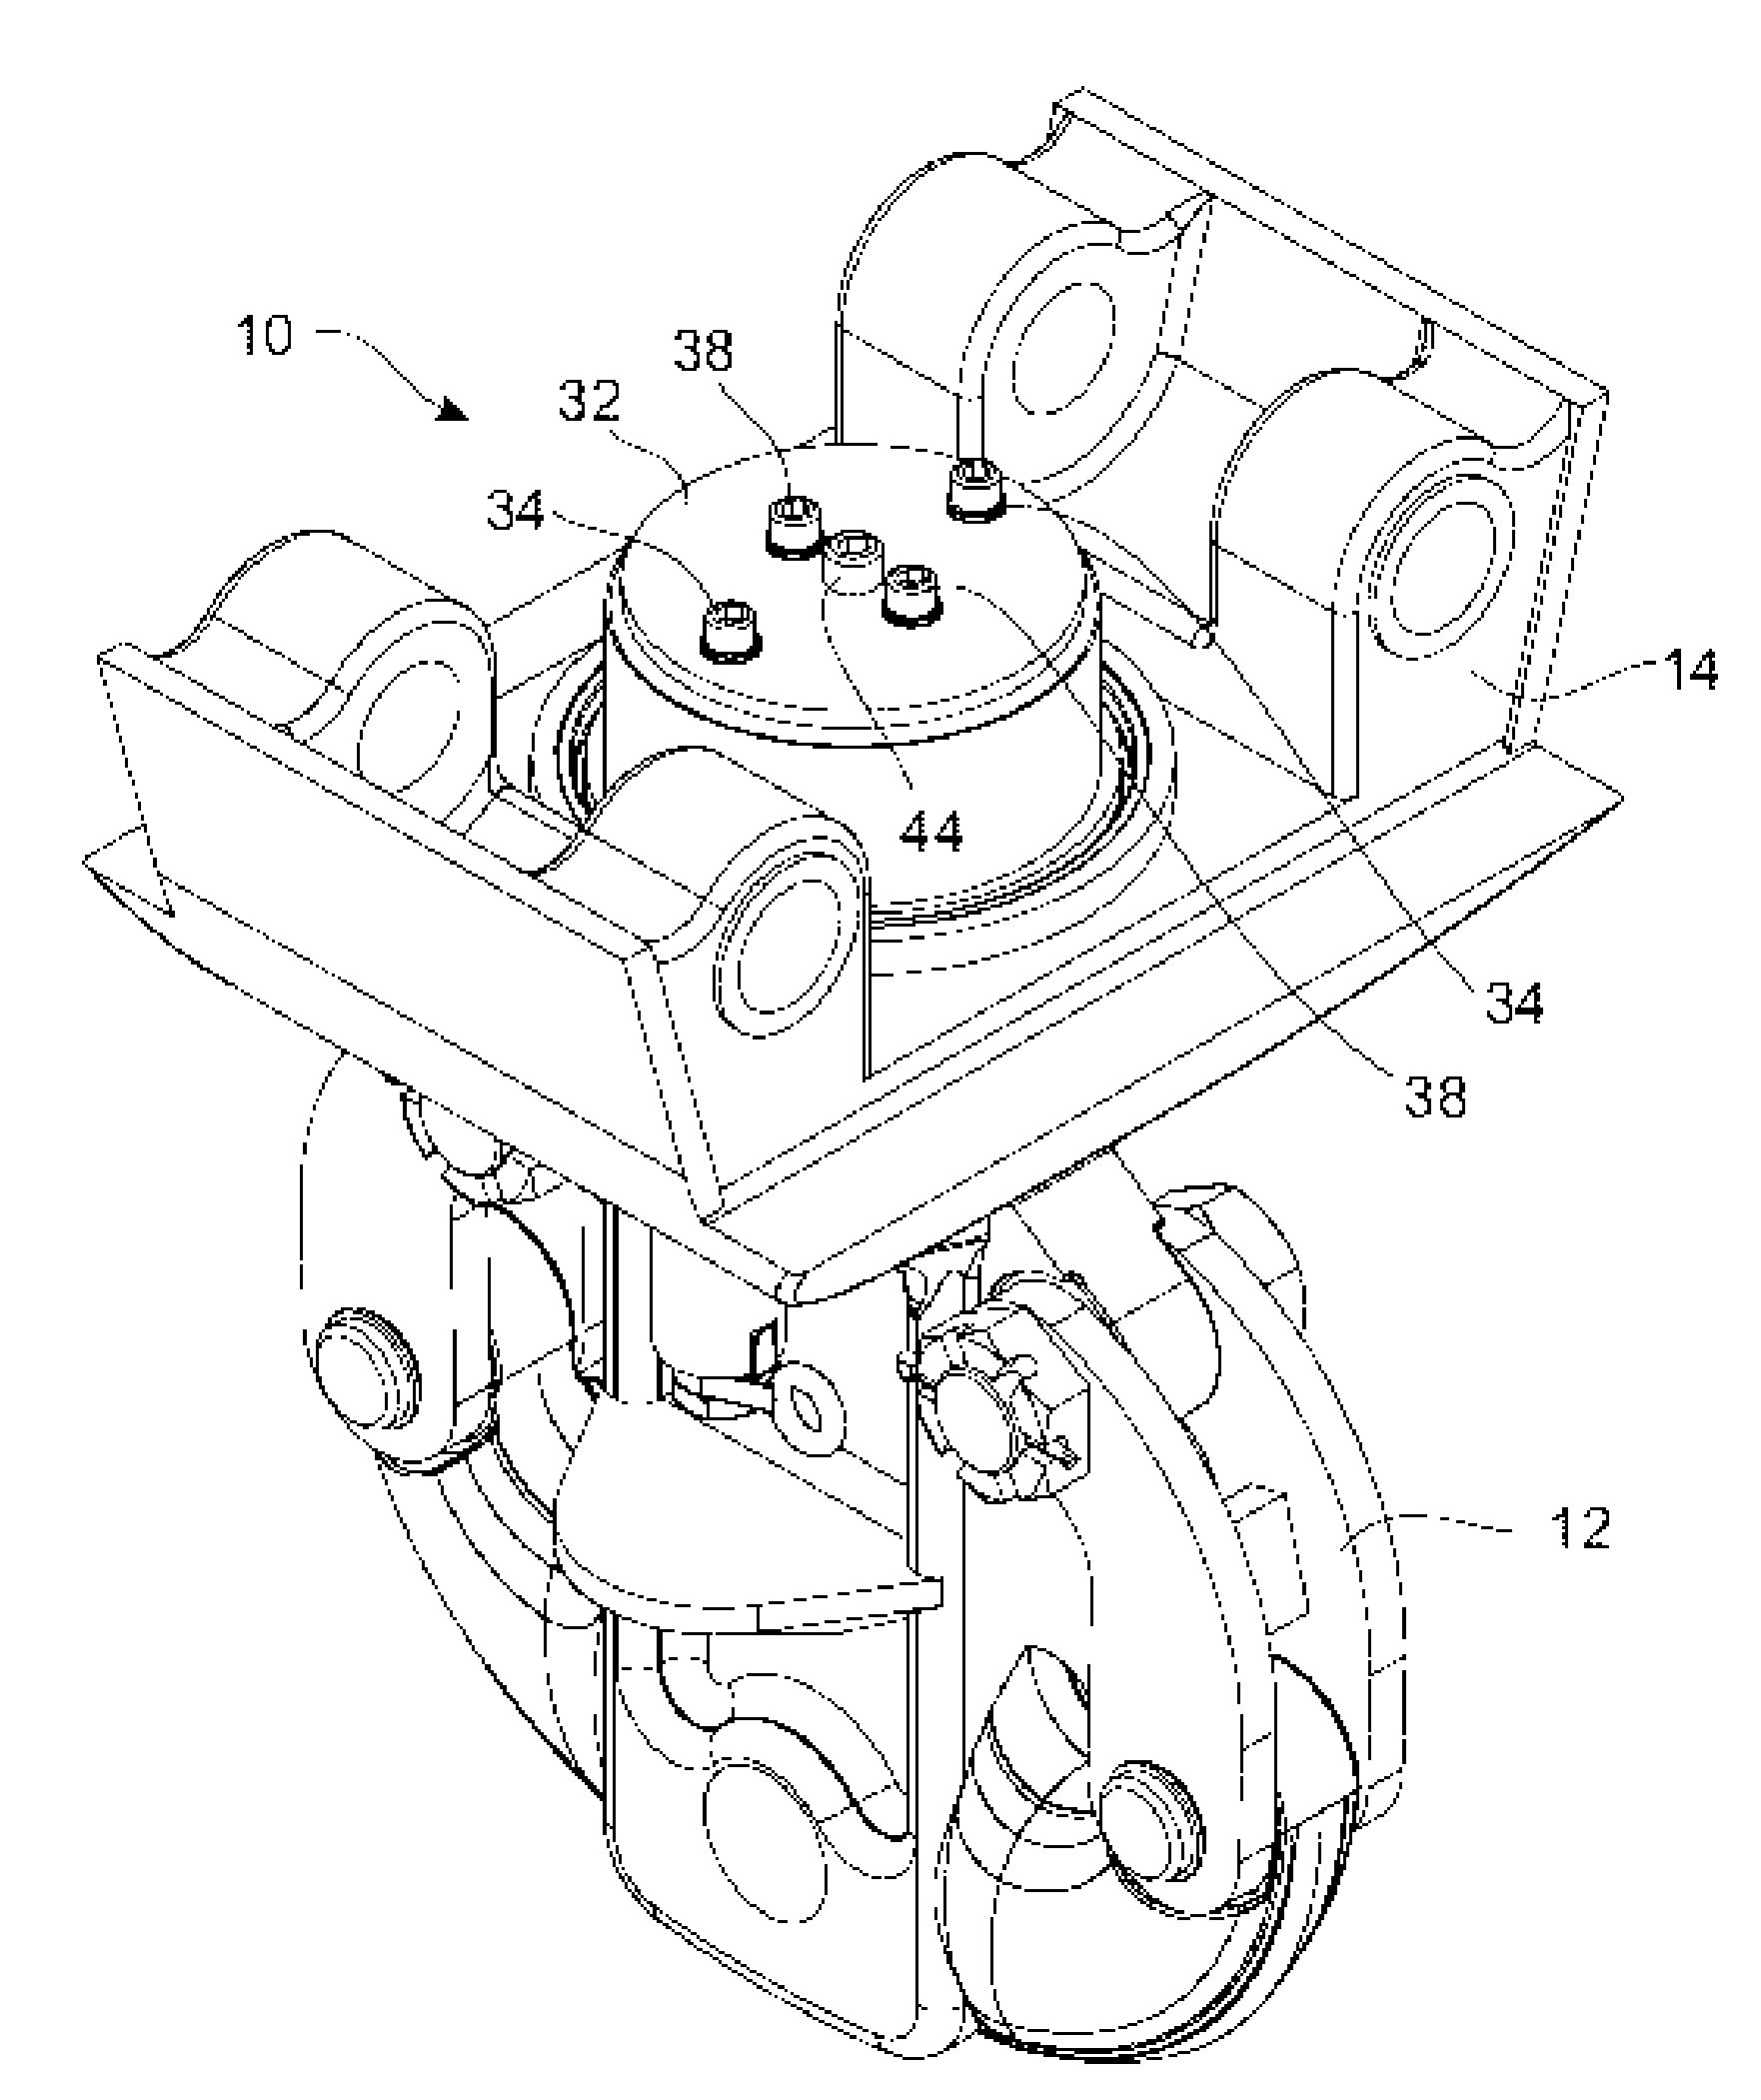 Retaining keeper assembly for a hoisting device